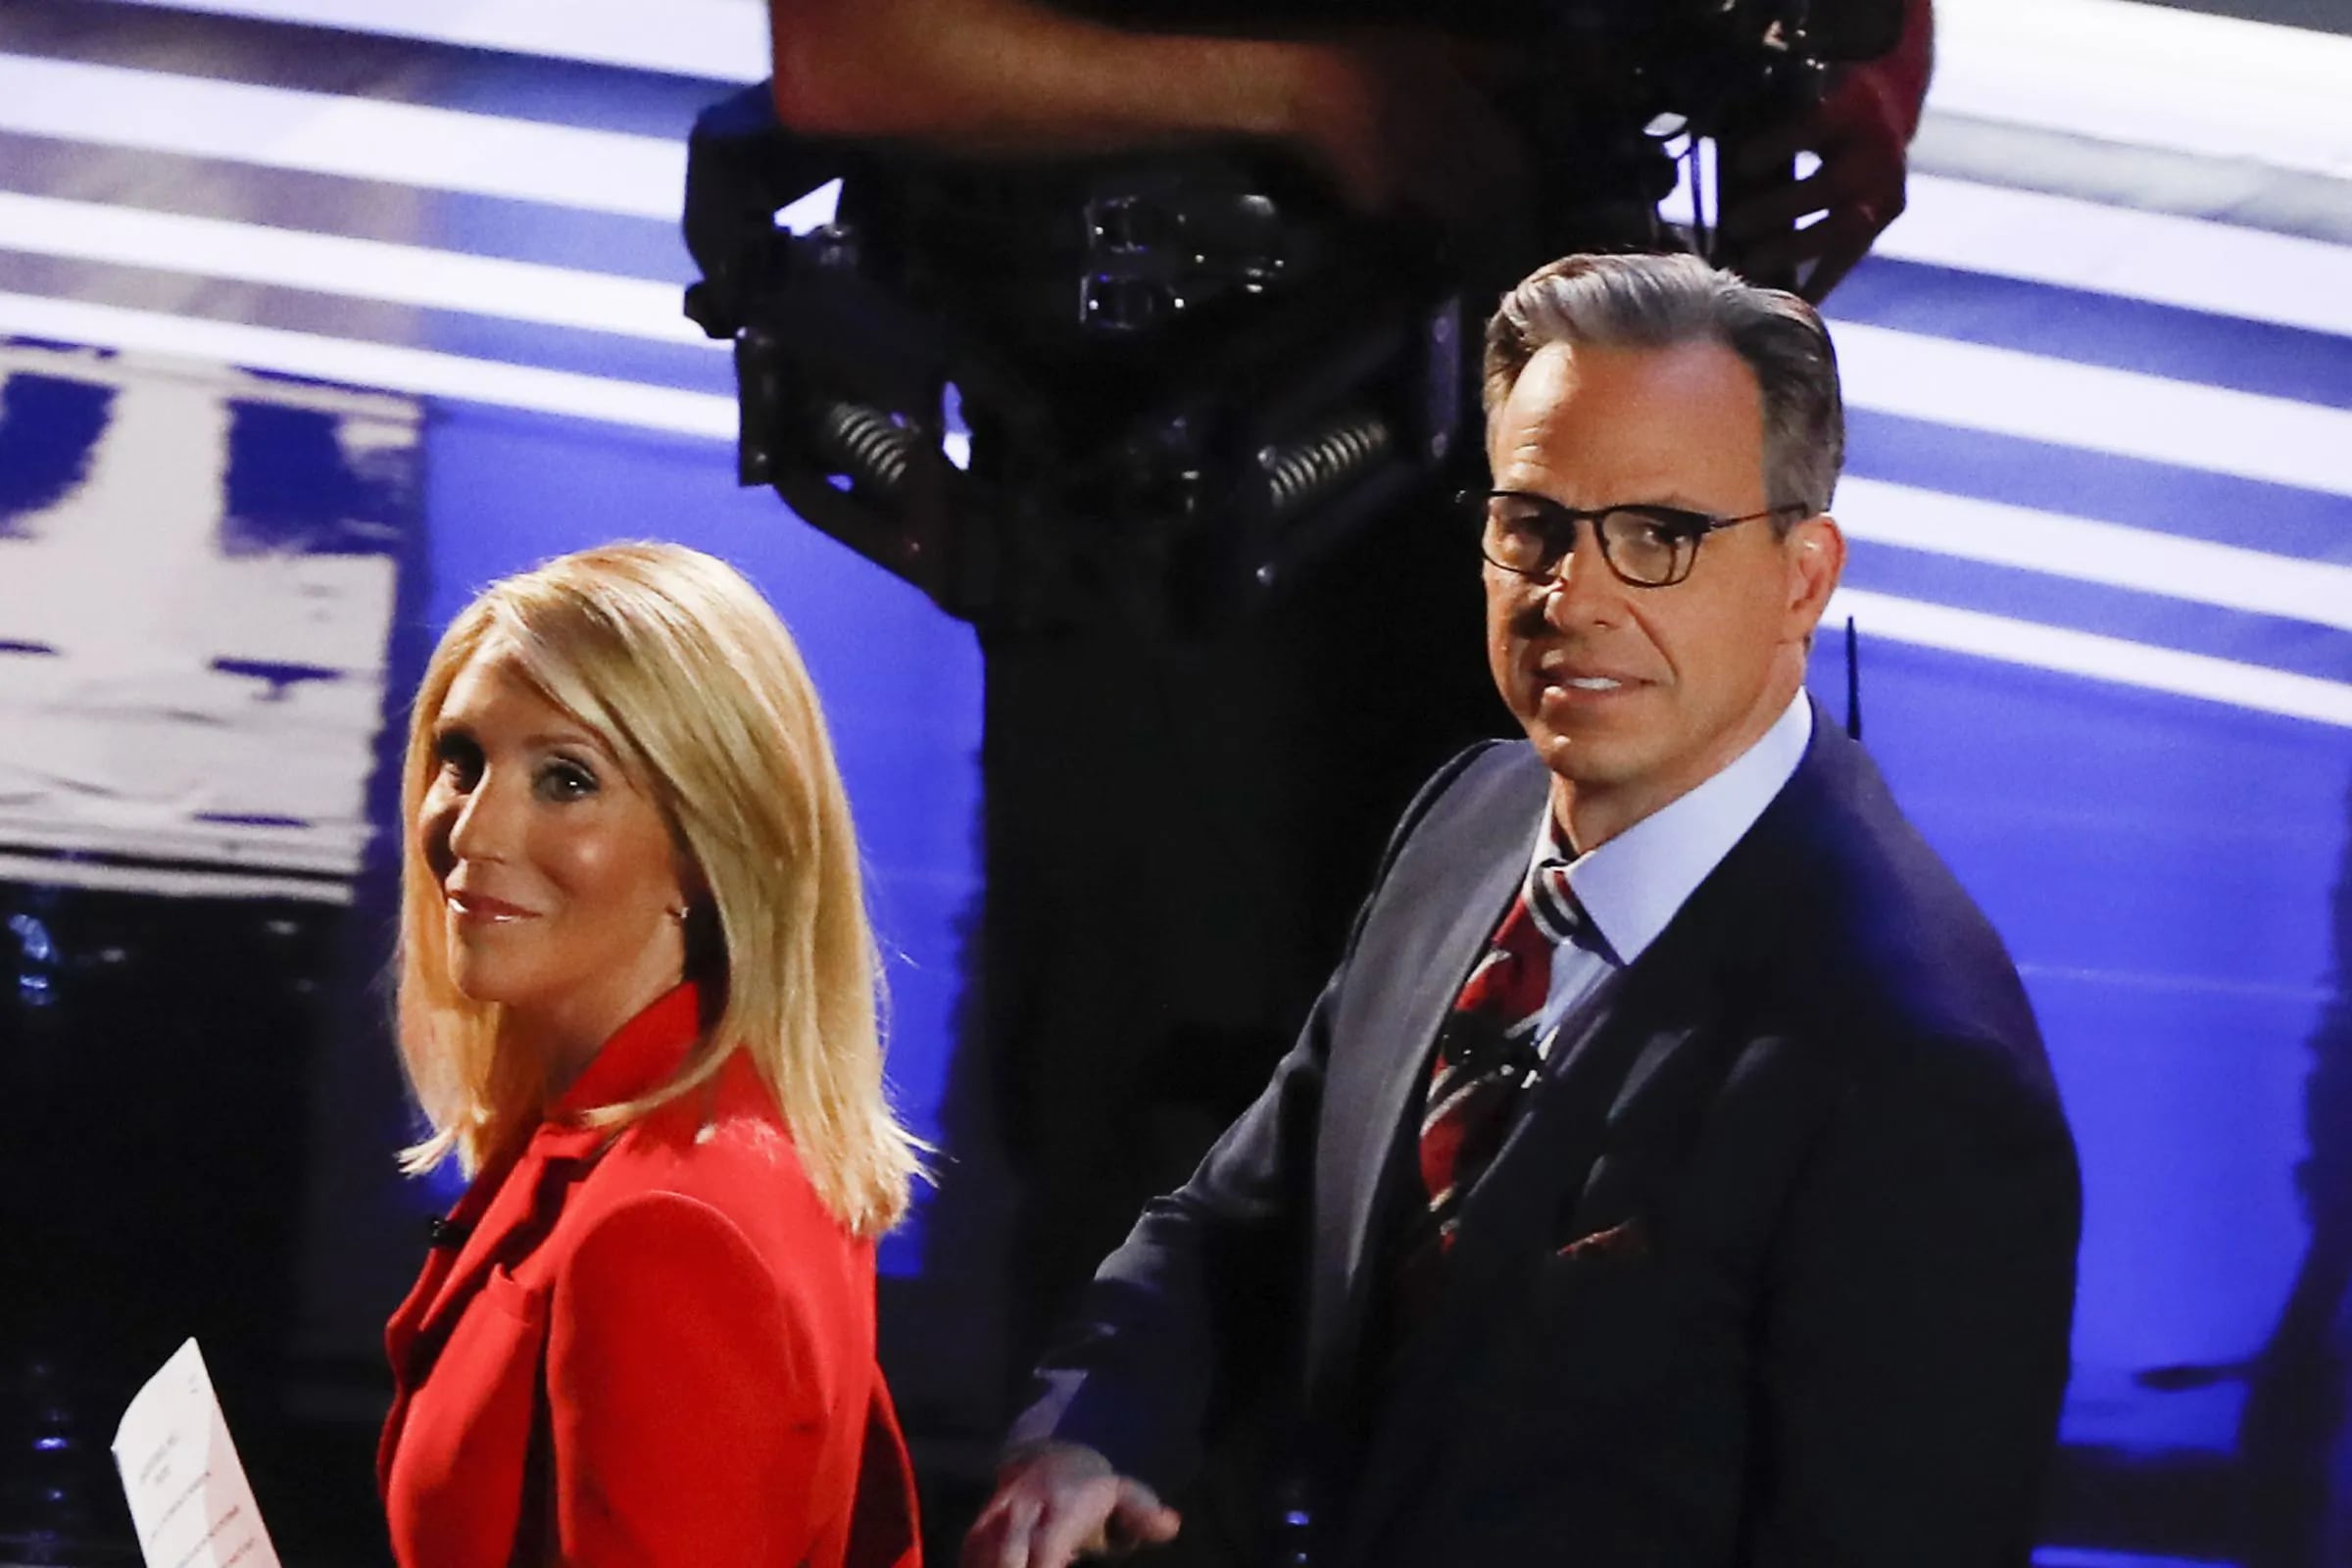 CNN anchors Dana Bash and Jake Tapper (seen here in 2019) will be the moderators during tonight's debate.